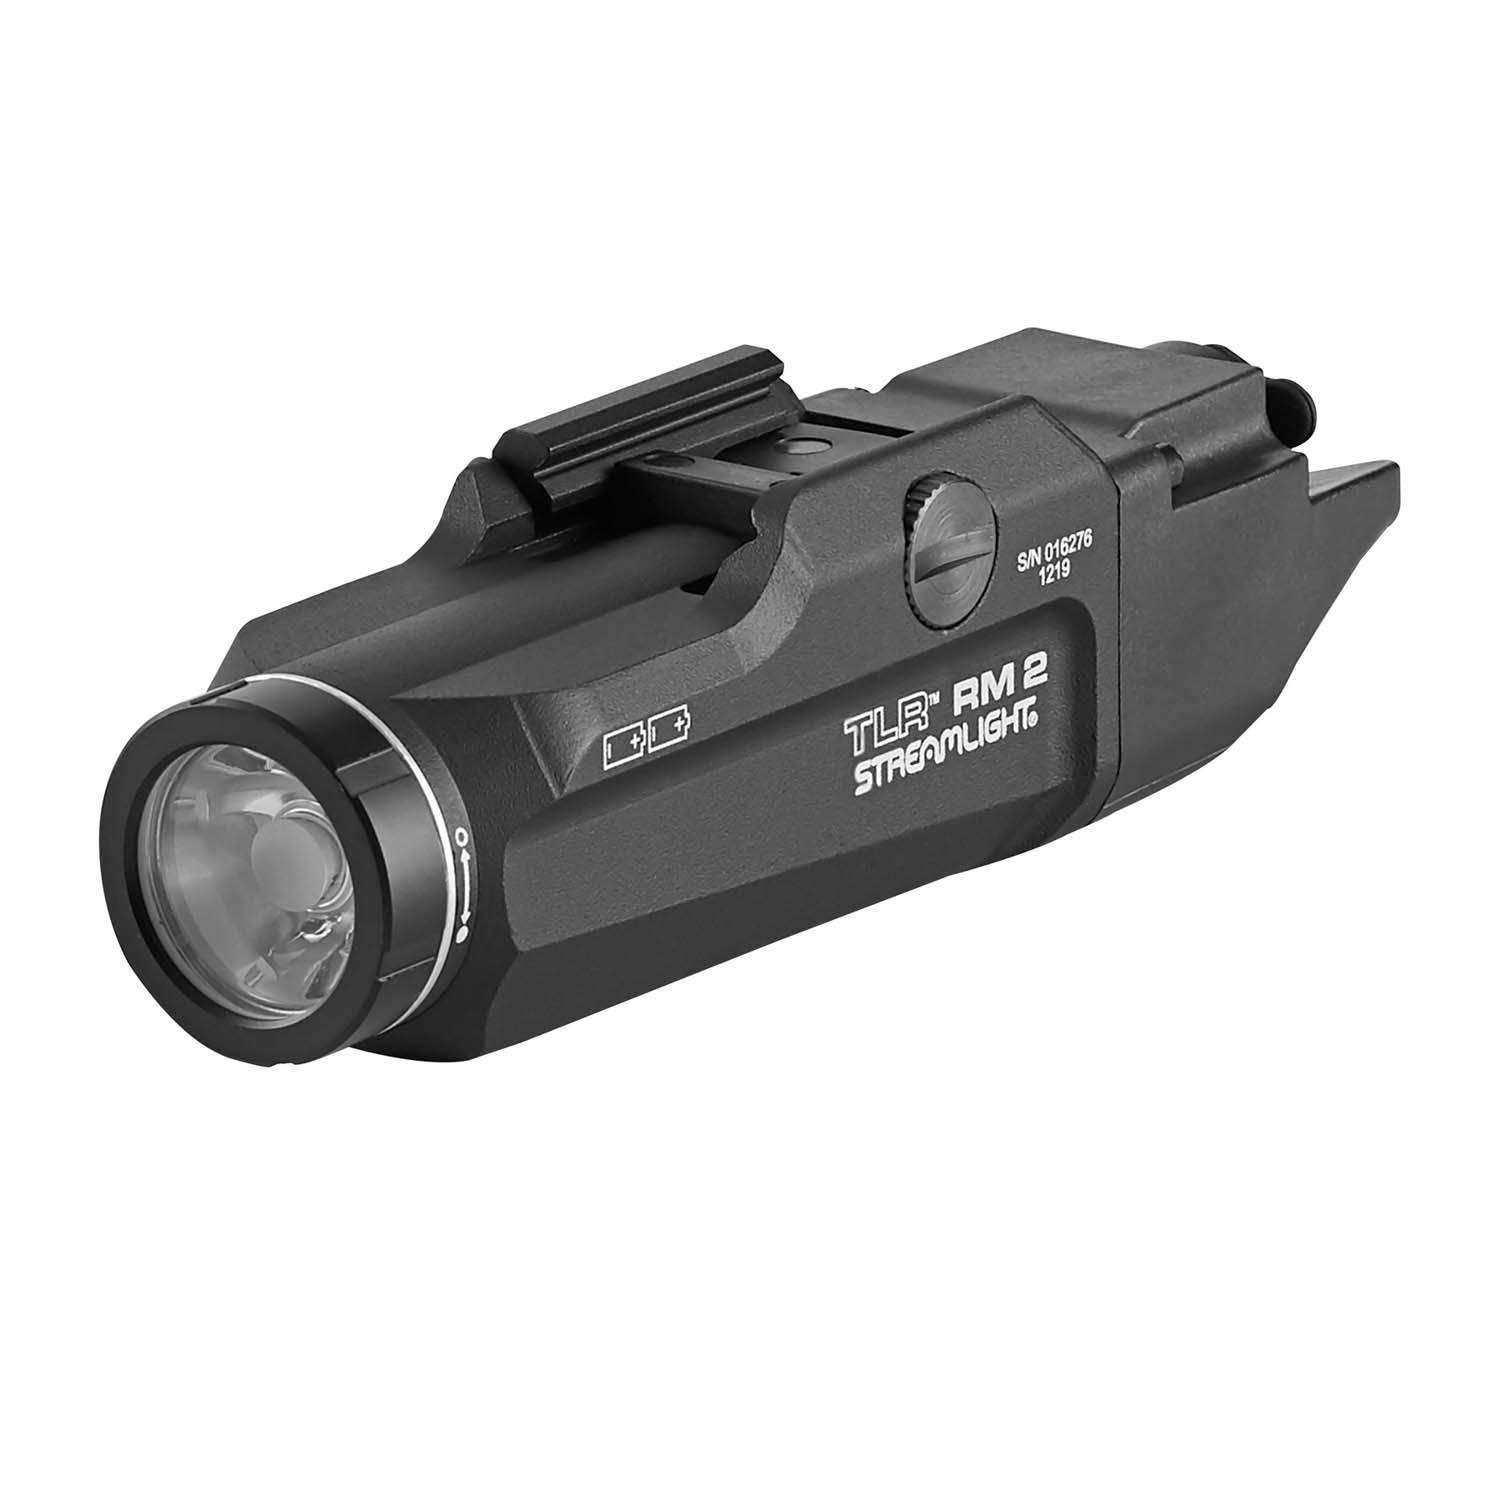 Streamlight TLR RM 2 Compact Mounted Tactical Light